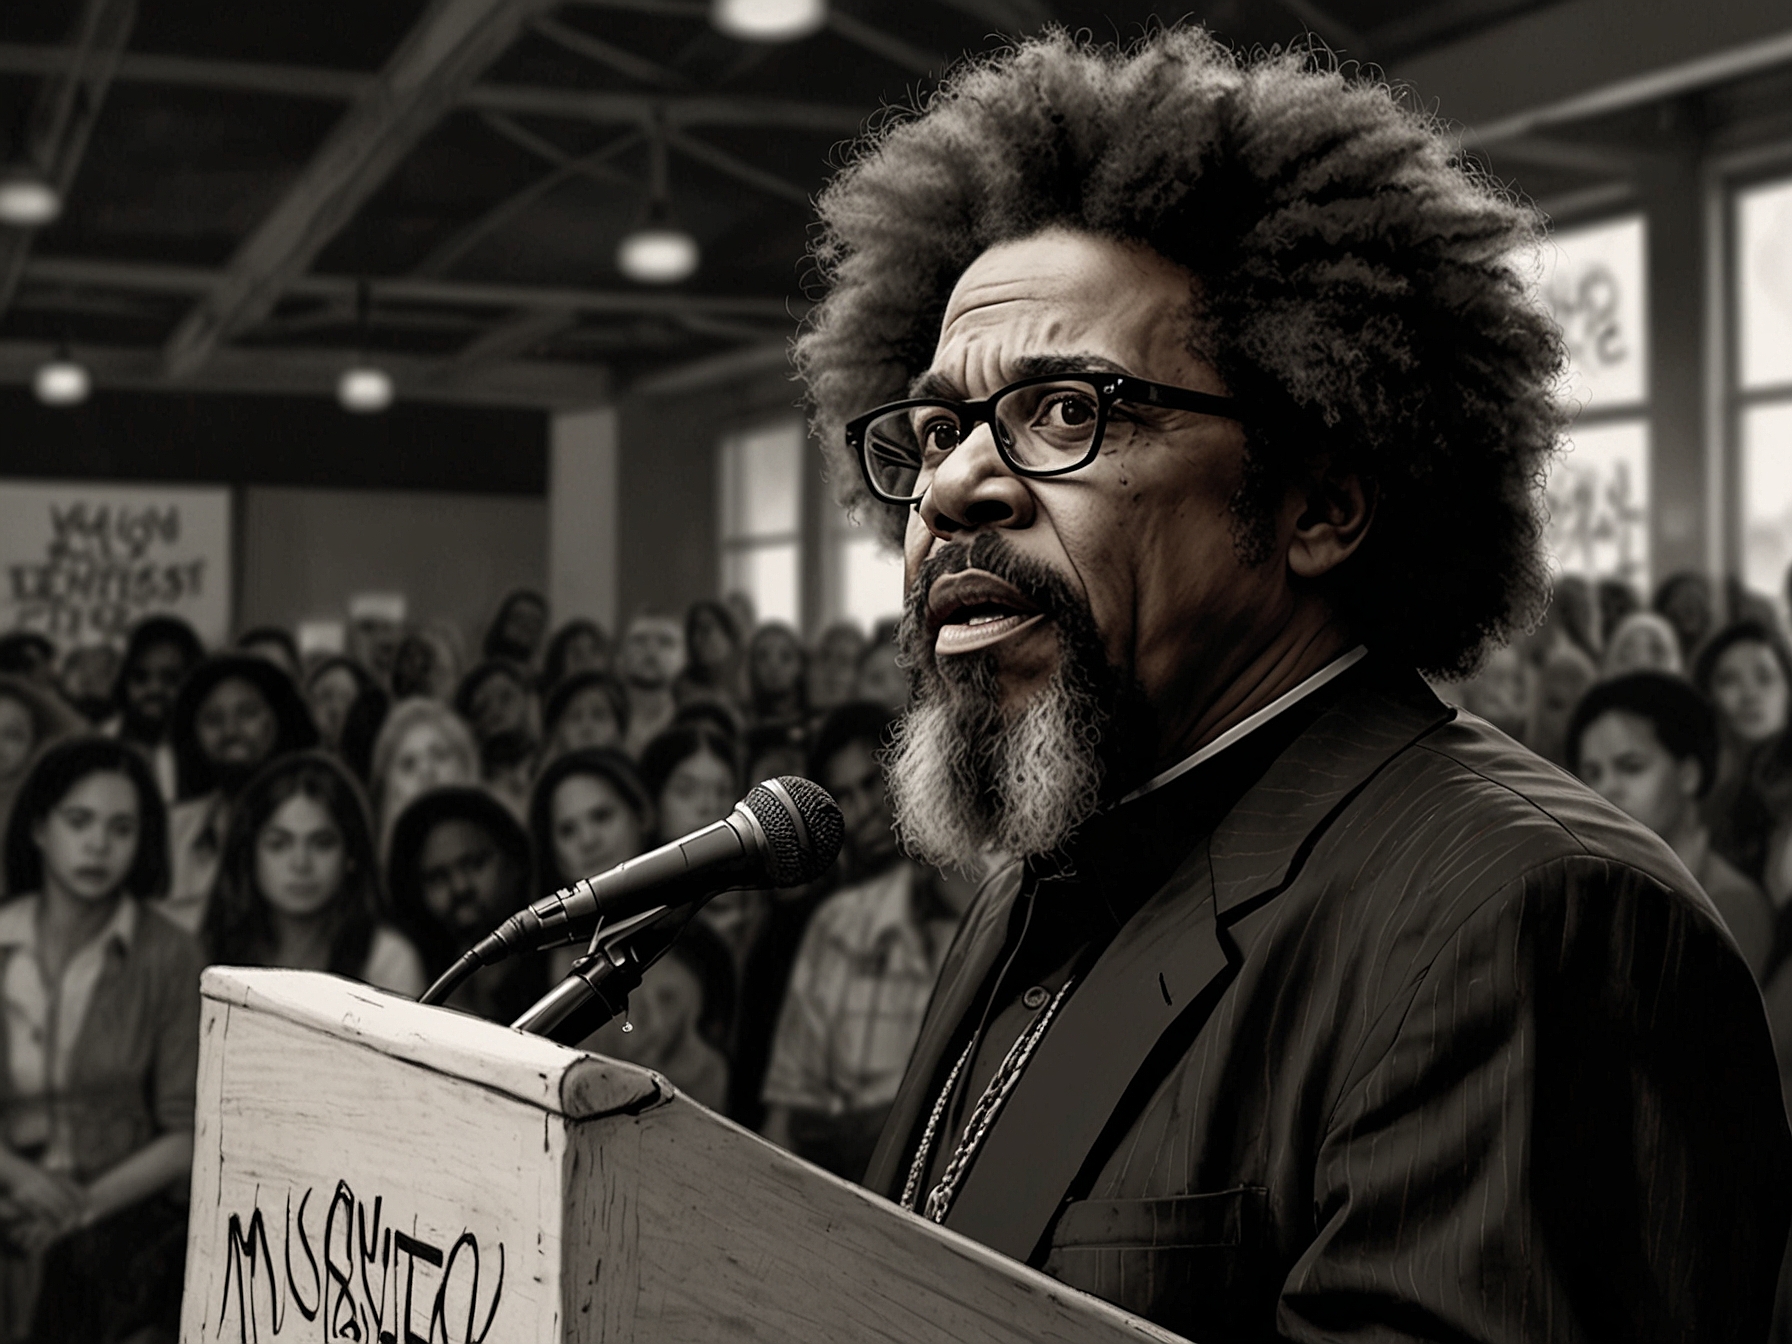 Cornel West speaking at a campaign rally in Arizona, with a diverse crowd in the background showing support. The event highlights the unexpected political collaboration and its impact.